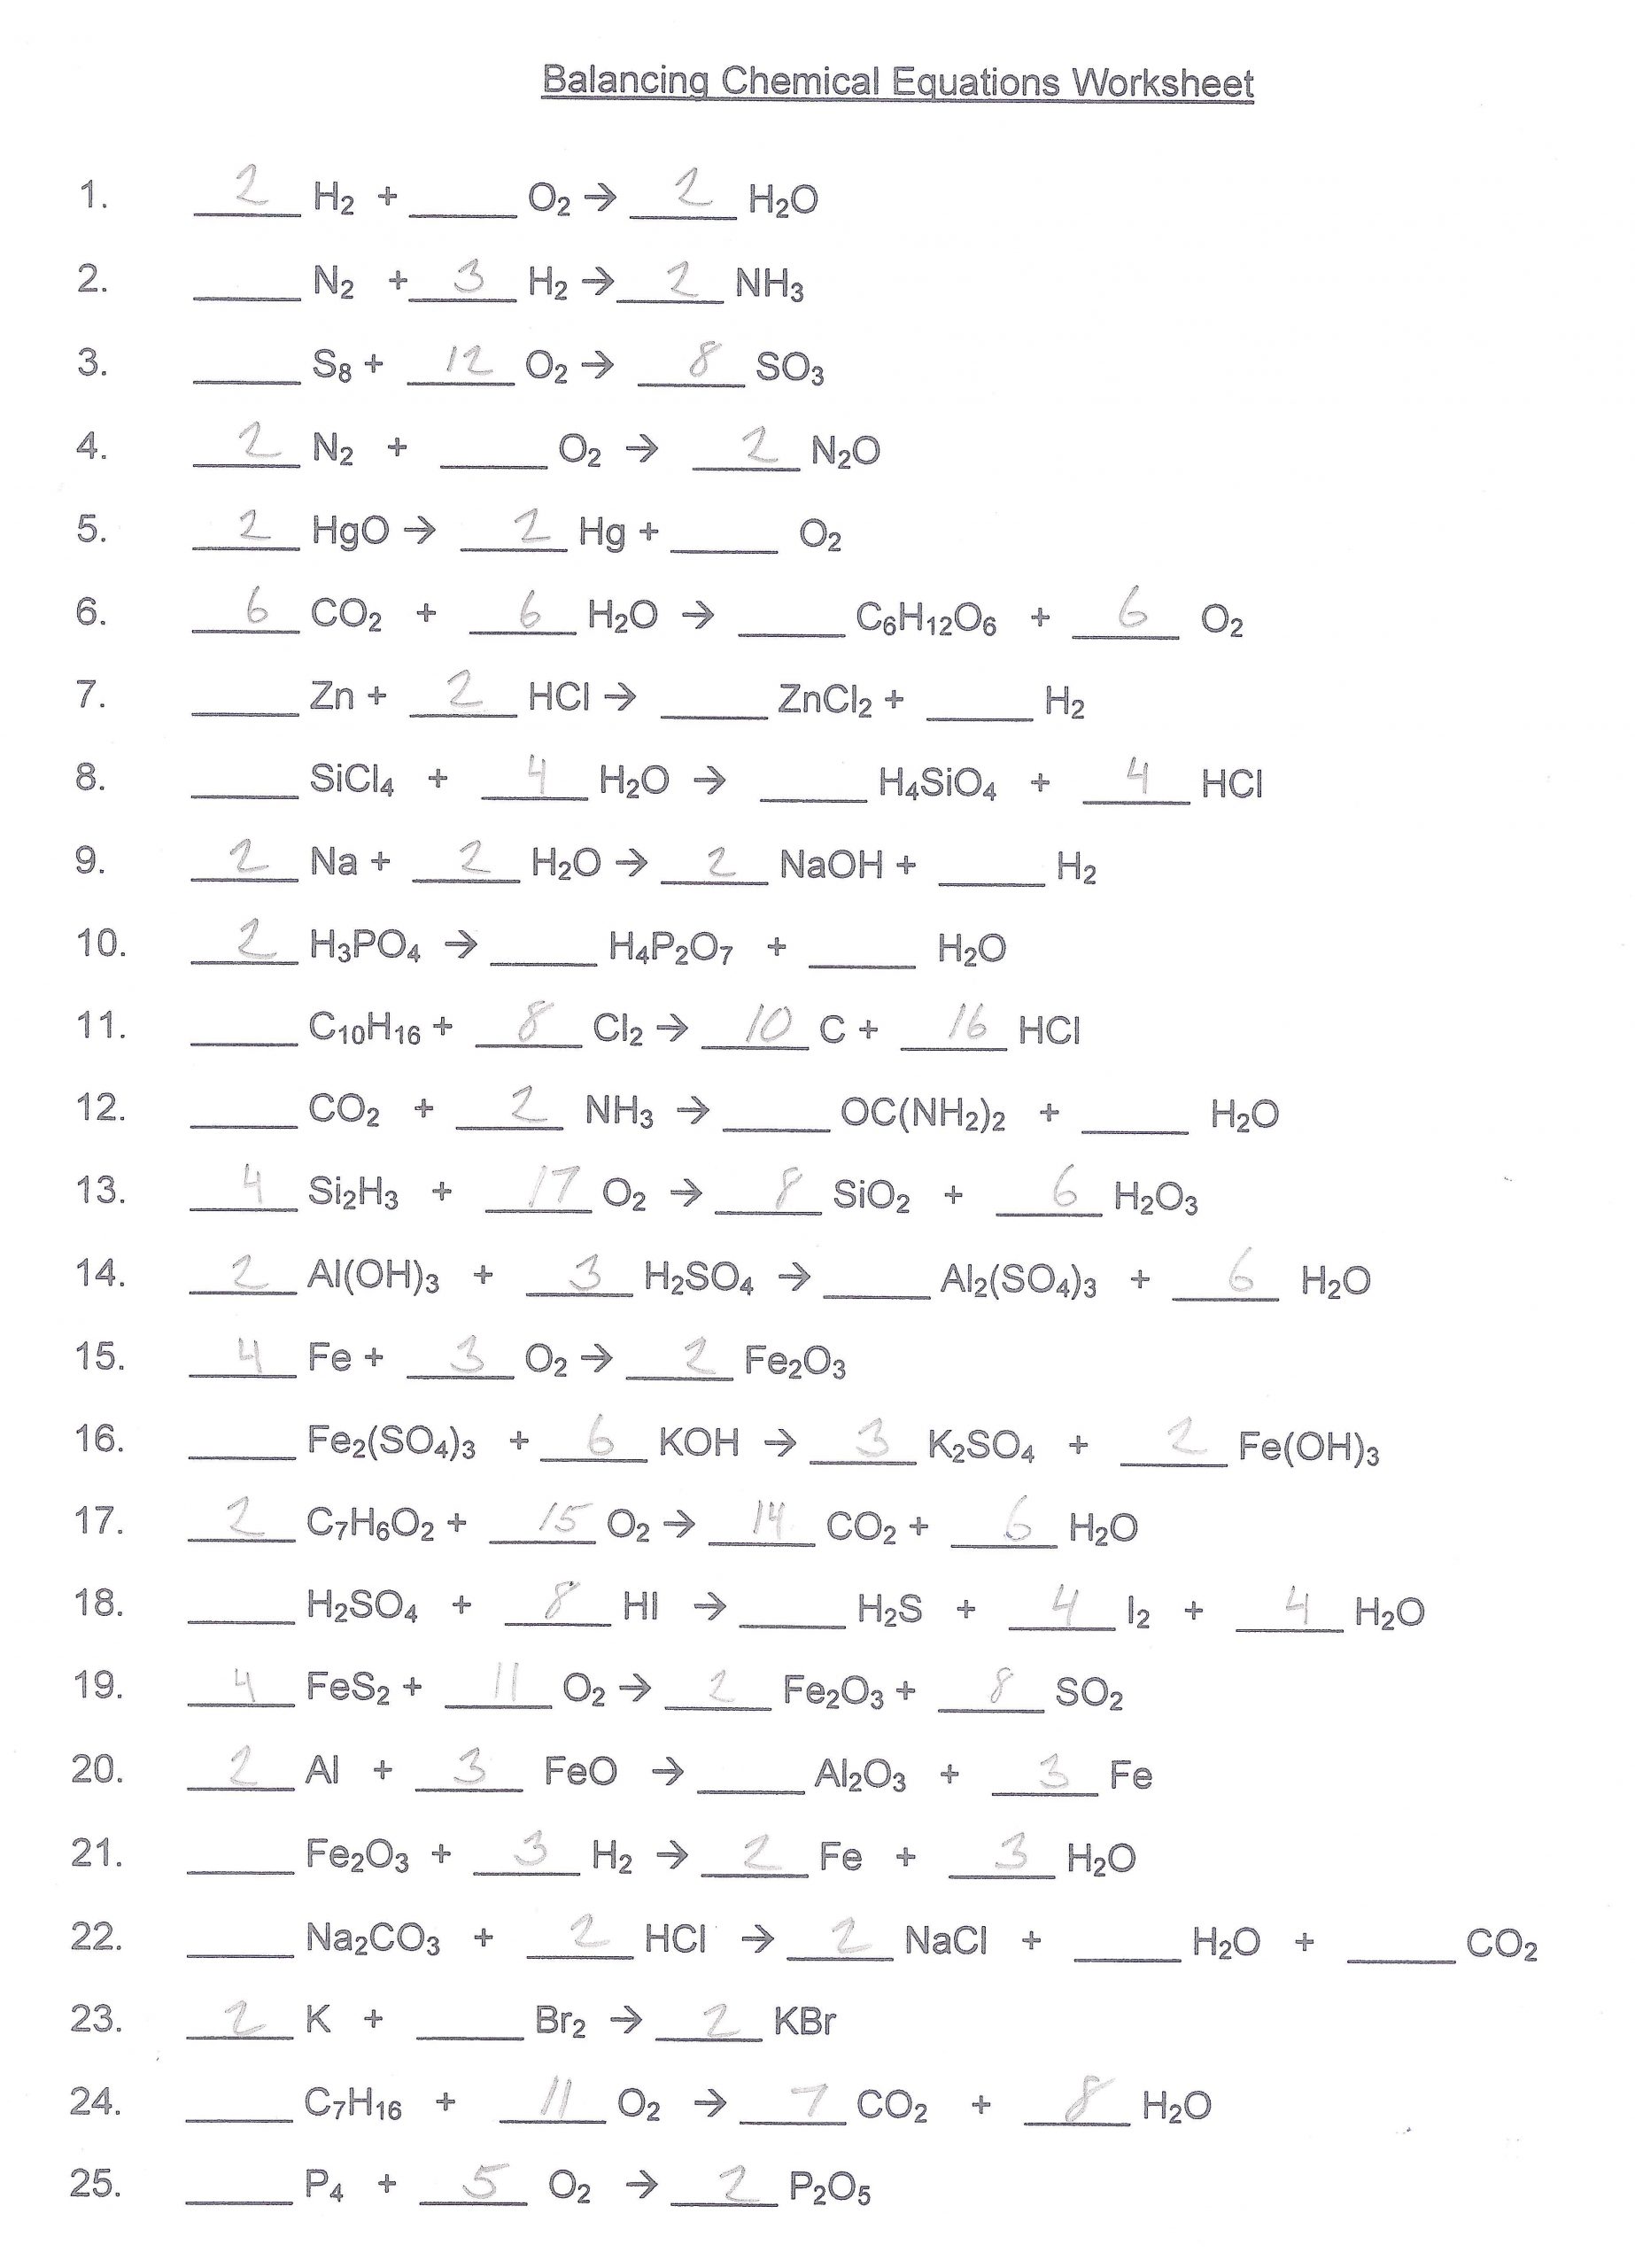 Balancing Equation Worksheet with Answers Balancing Chemical Equations Worksheet Answer Key